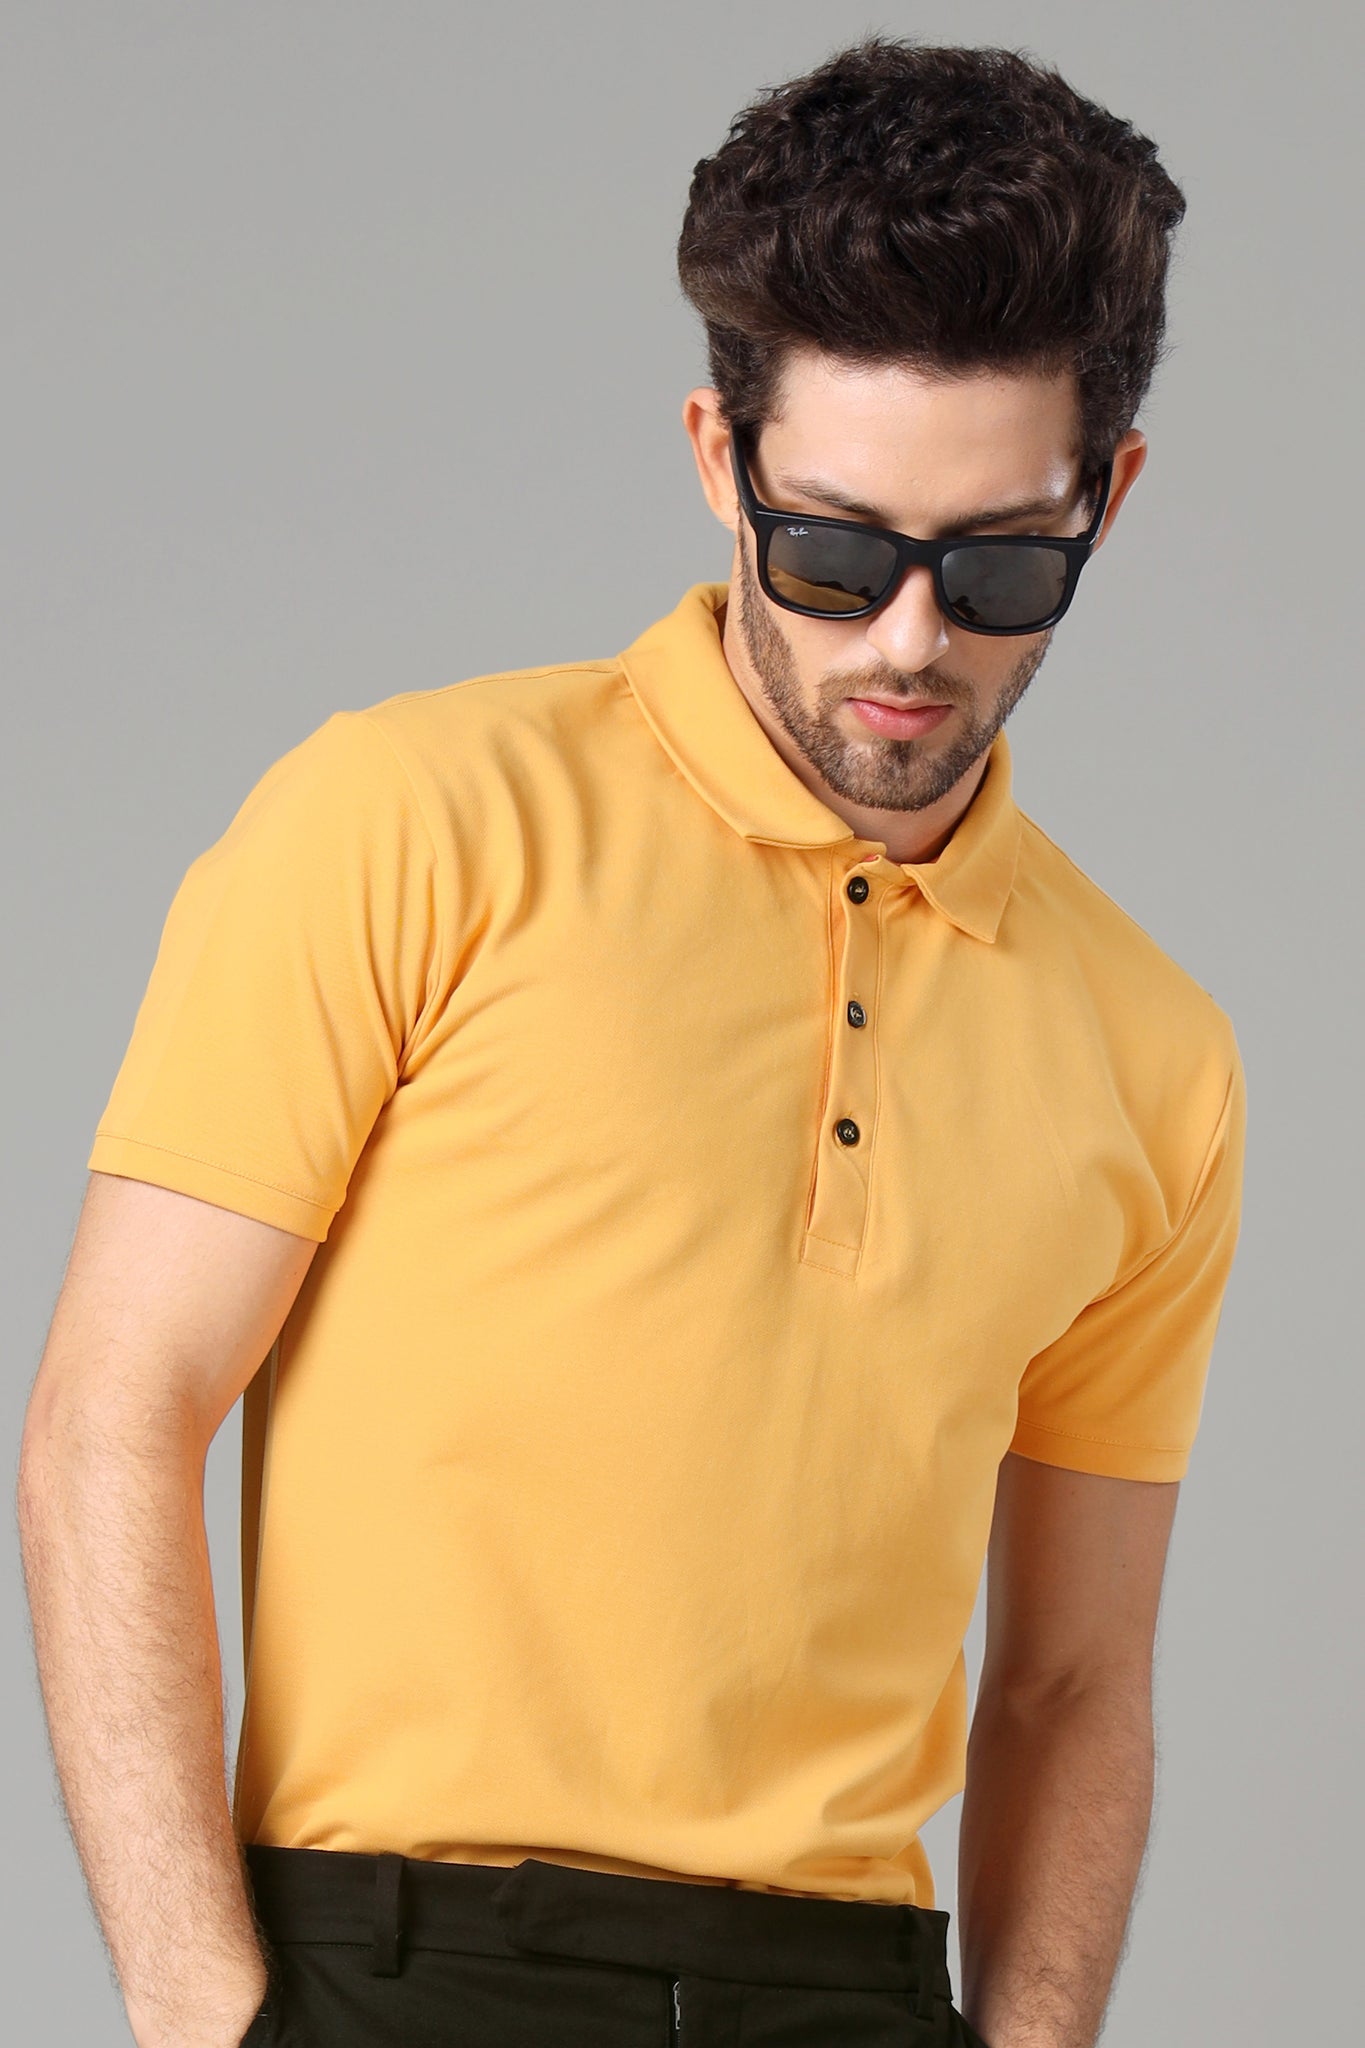 Exclusive Golden Yellow Polo T-Shirt For Men